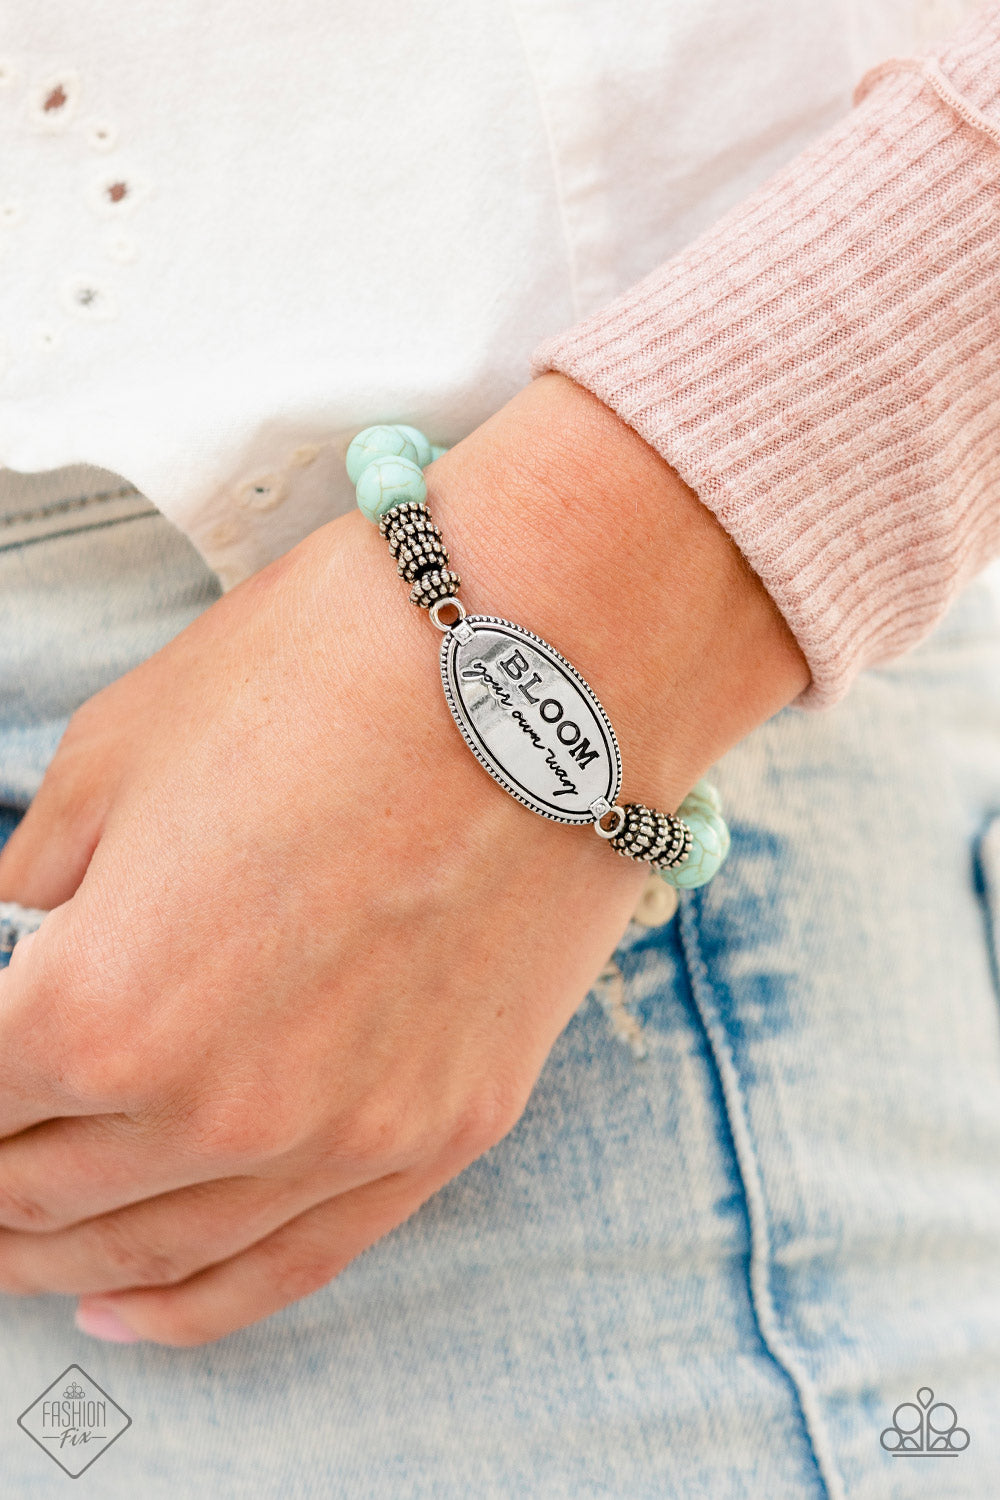 Bedouin Bloom Blue Bracelet - Paparazzi Accessories  An asymmetrical textured oval pendant features the phrase "BLOOM your own way" in a variety of fonts to emphasize the inspirational message. Four textured wheels fan out from the pendant to a refreshing collection of light blue stones that stretch along the wrist on an elastic stretchy band for a charming pop of color along the wrist. As the stone elements in this piece are natural, some color variation is normal.  Sold as one individual bracelet.